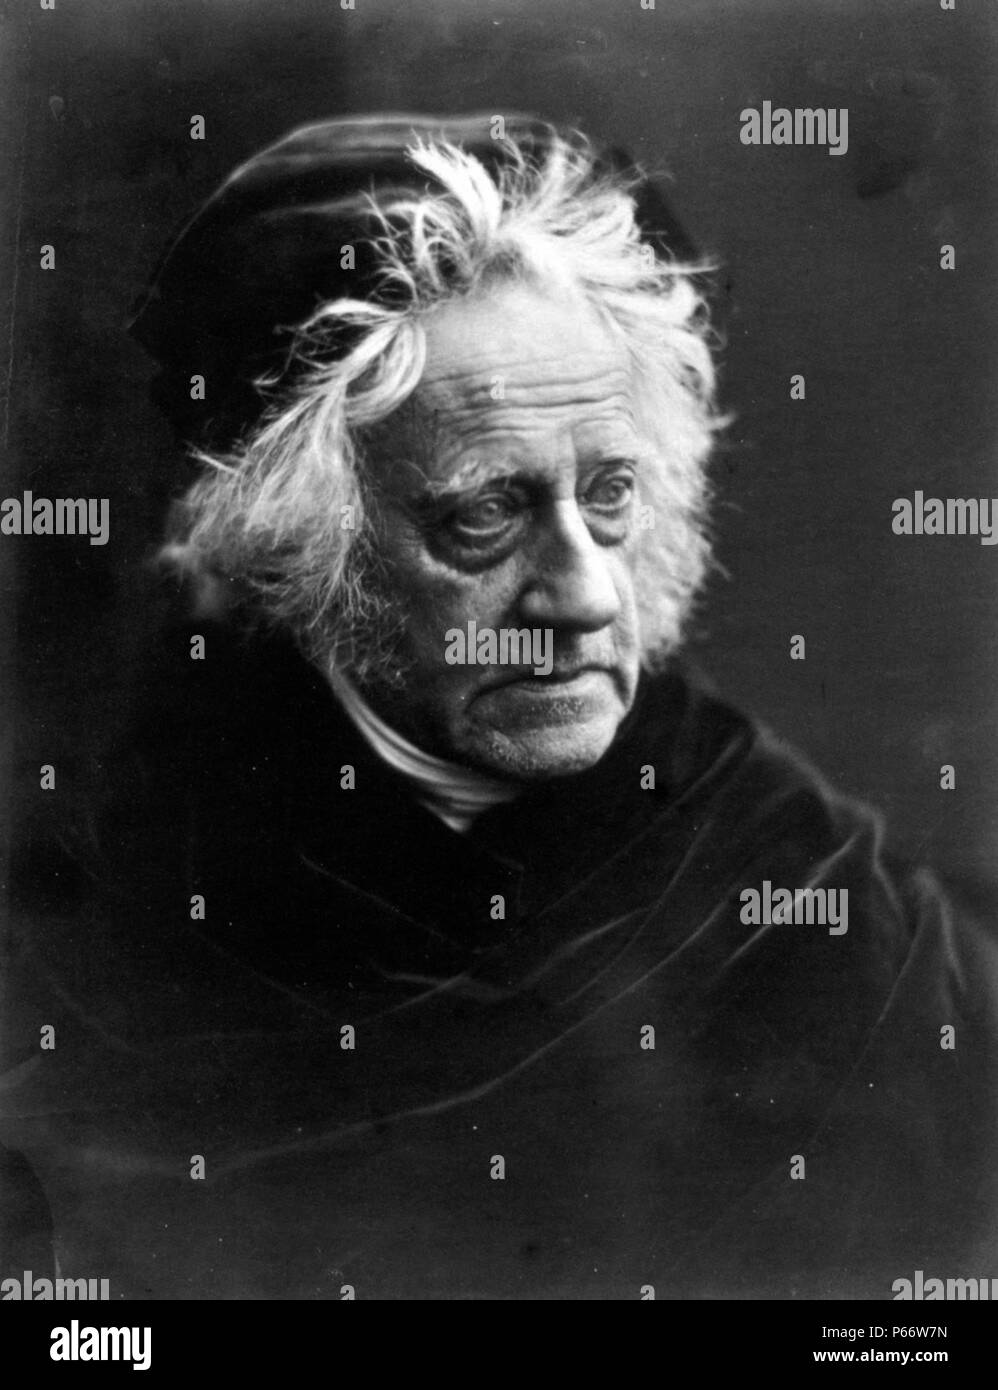 Sir John Herschel with Cap by Julia Margaret Cameron (11 June 1815 – 26 January 1879) British photographer. She became known for her portraits of celebrities. Sir John Herschel was an English astronomer, mathematician and scientist. Stock Photo